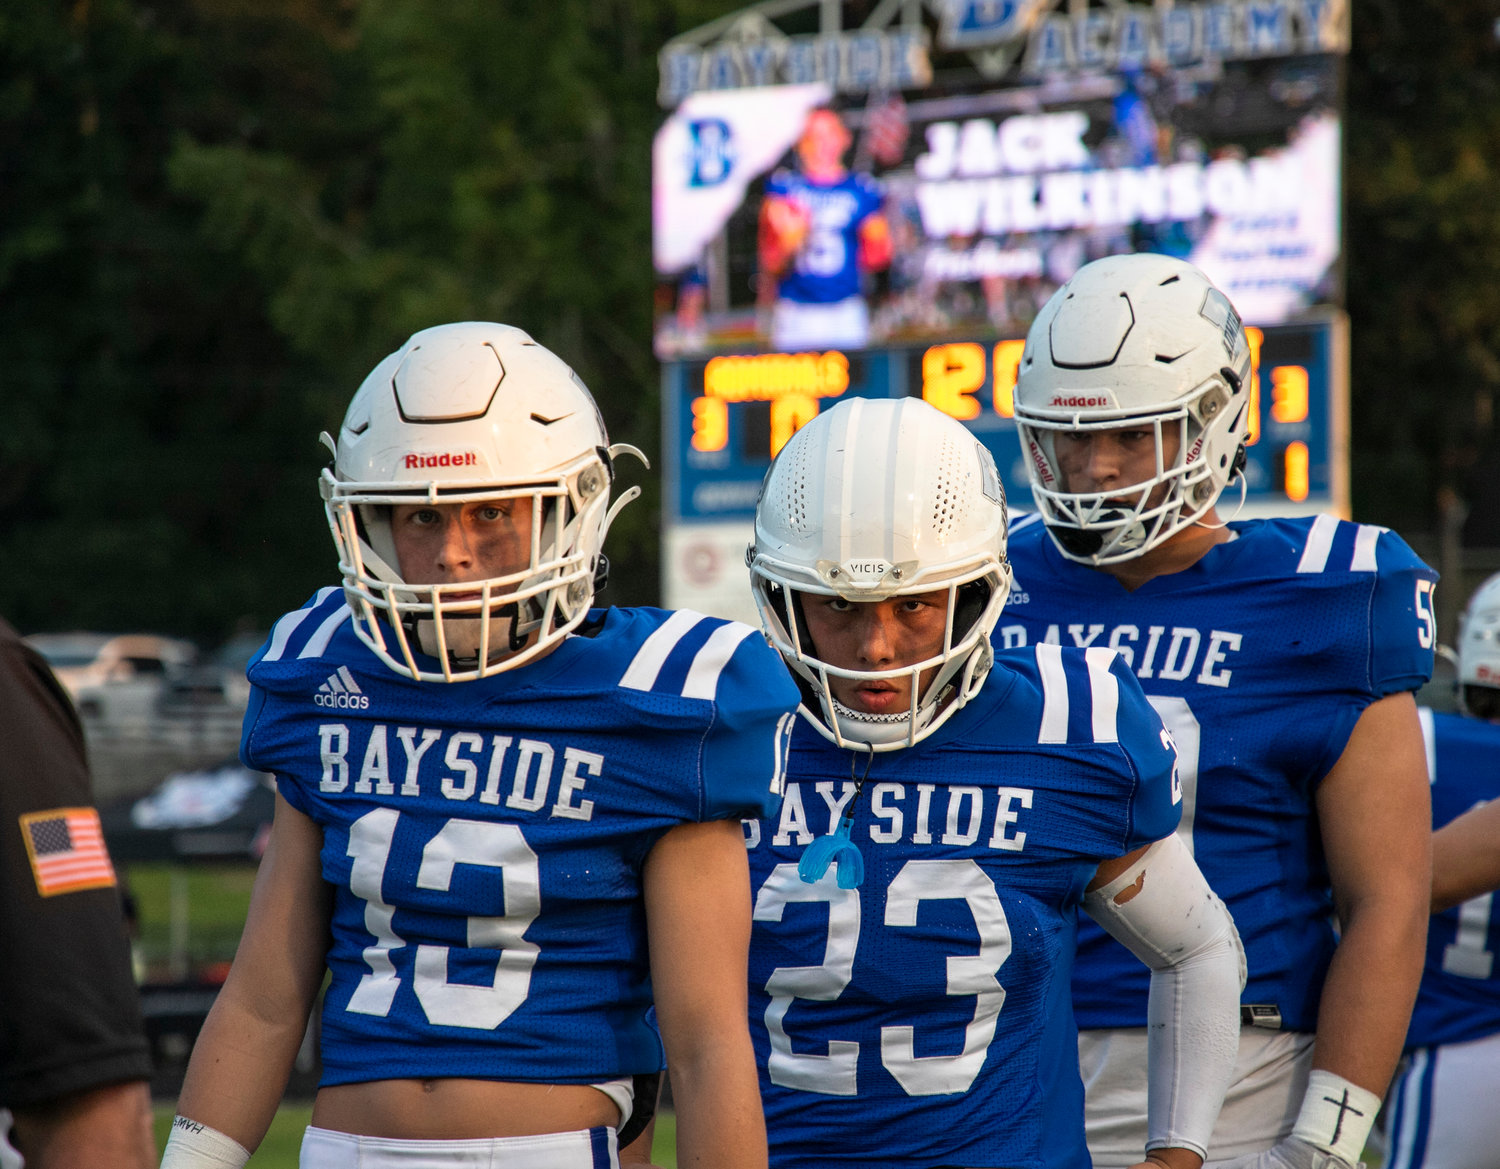 Wills Norton (13), Brennan Yamane (23), Graham Uter (50) and the Admiral captains walk out for the coin toss ahead of Bayside Academy’s region-opening game against St. Michael Sept. 2 at Freedom Field. Norton returned an interception and punt each over 50 yards and Yamane ripped off a 54-yard touchdown run in the Admirals’ 41-7 win over Satsuma last Friday.